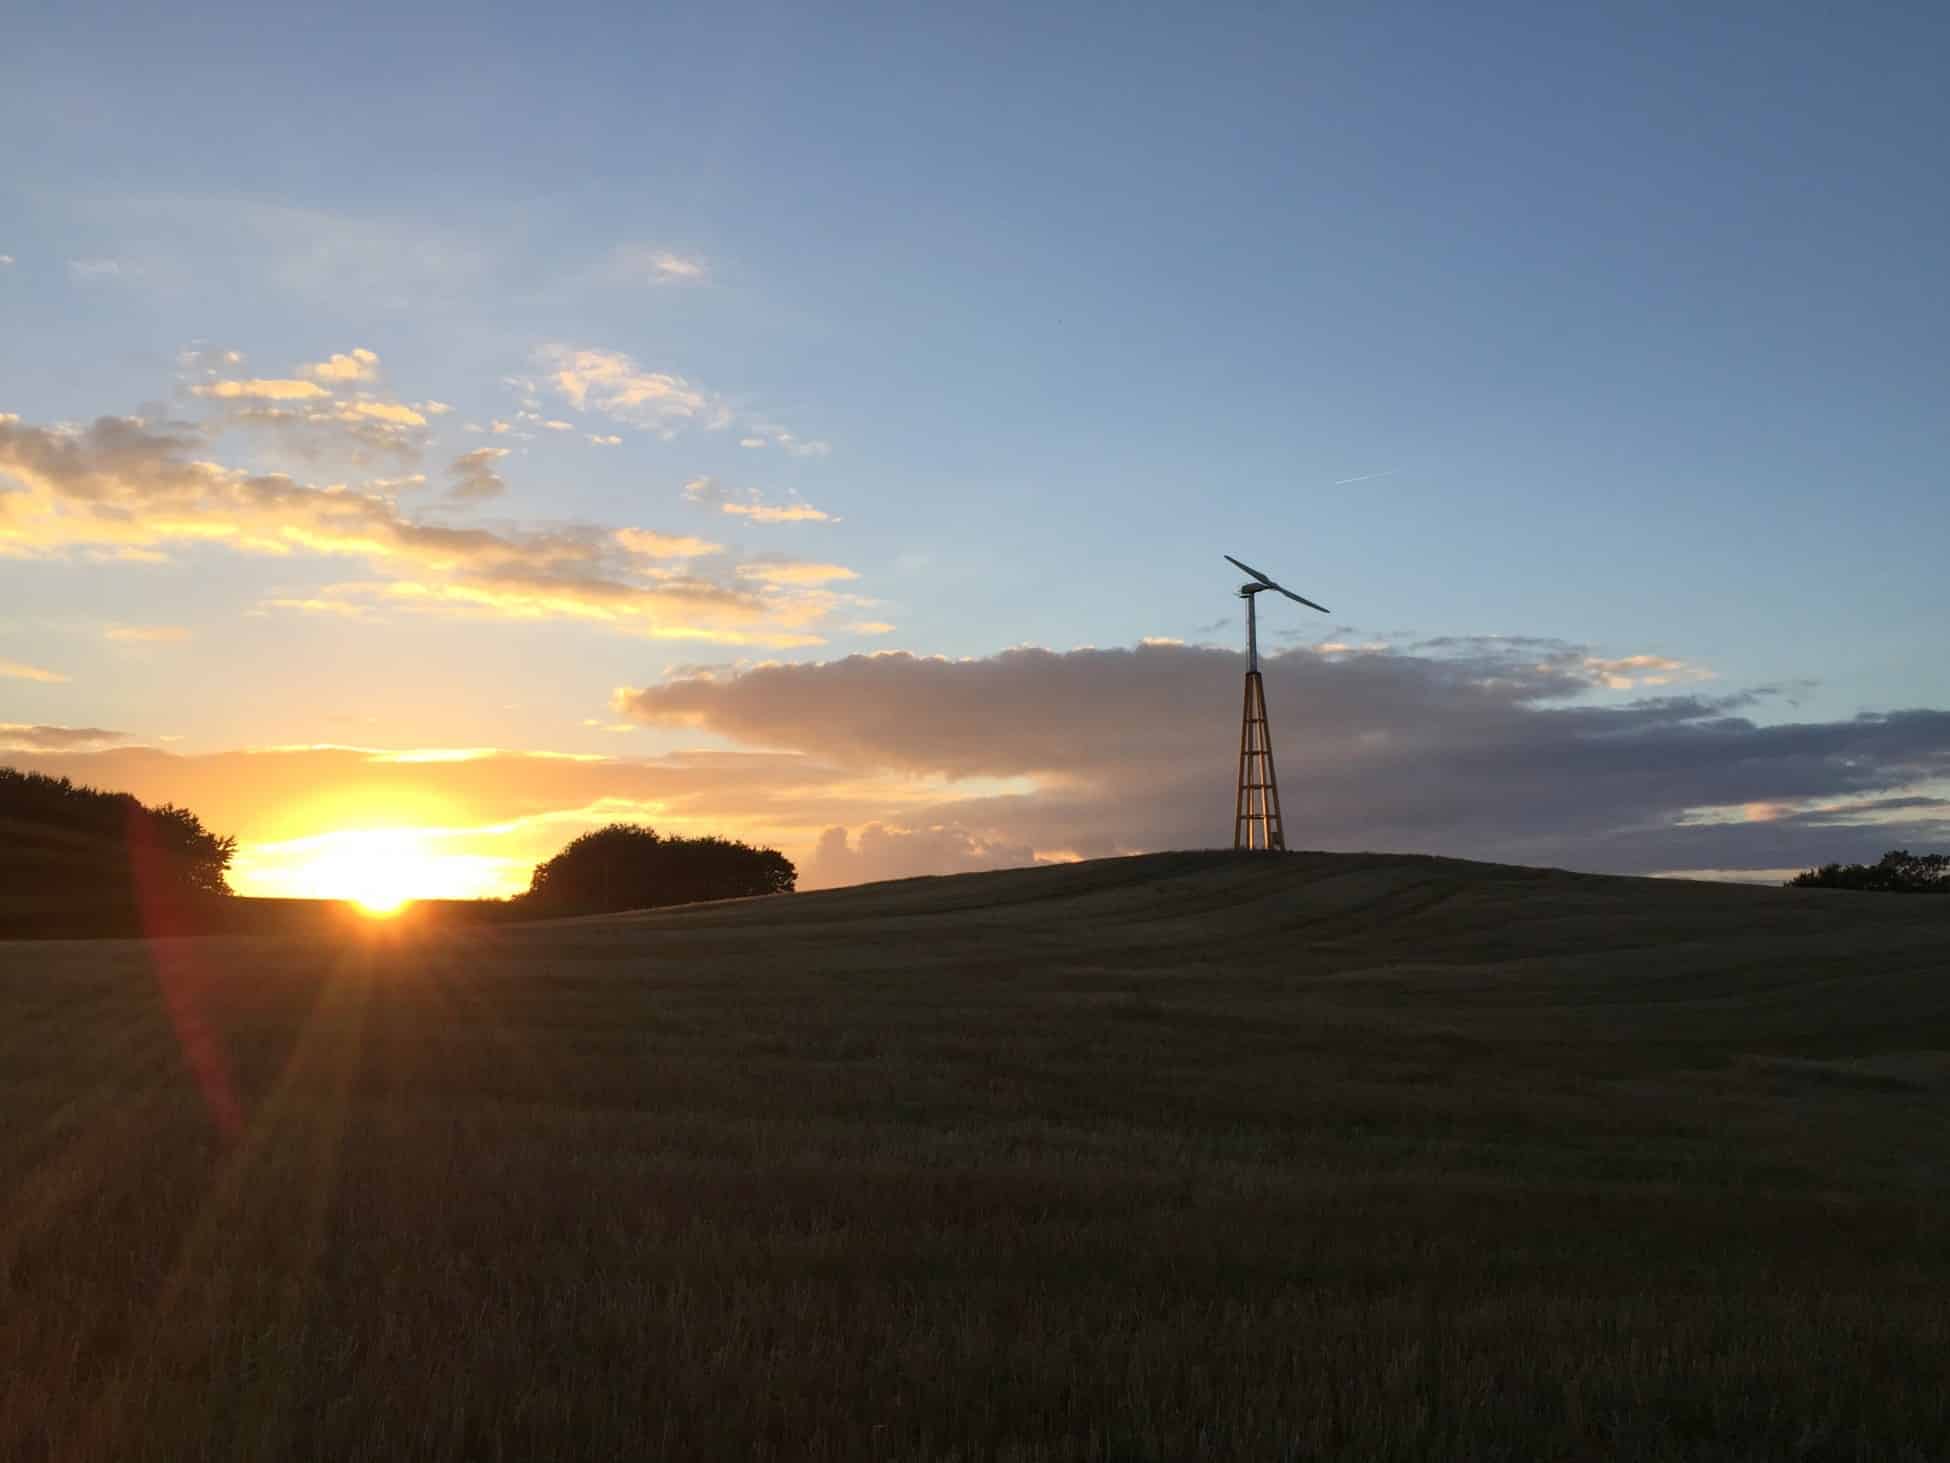 Dalifant small wind turbine 11 kW on a wooden tower at sunset